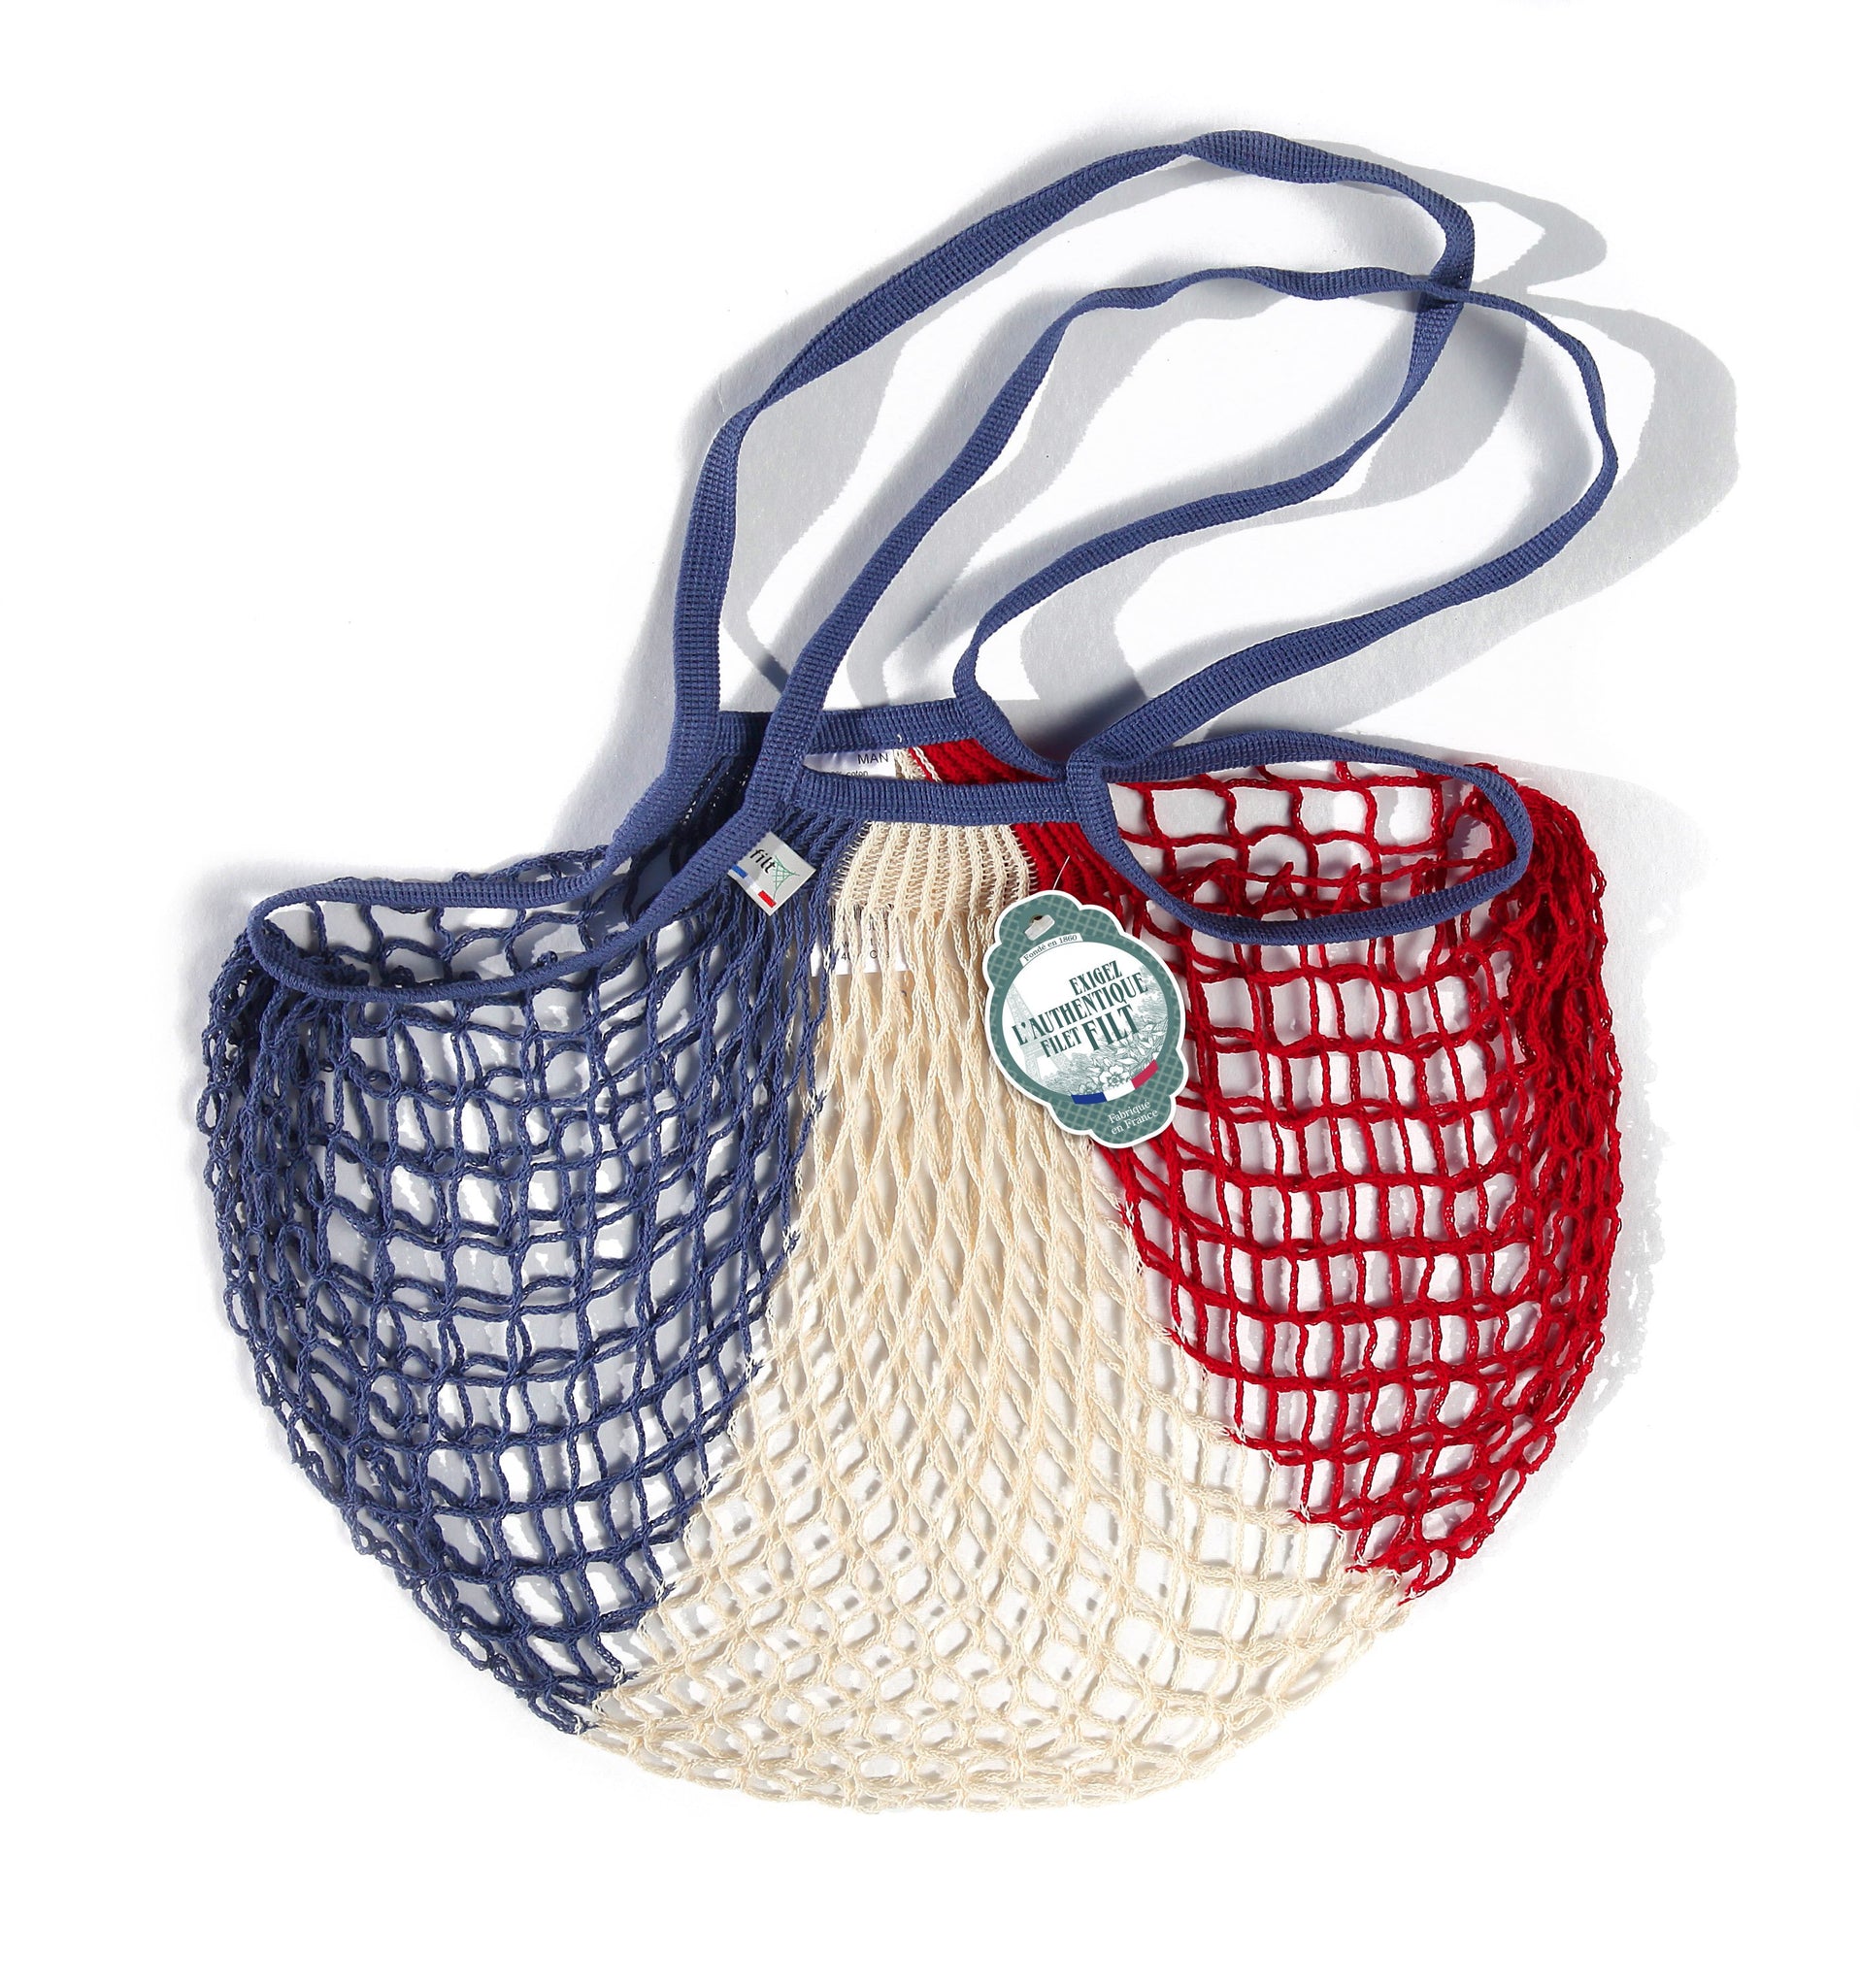 Filt Large Bag in Red, White, and Blue